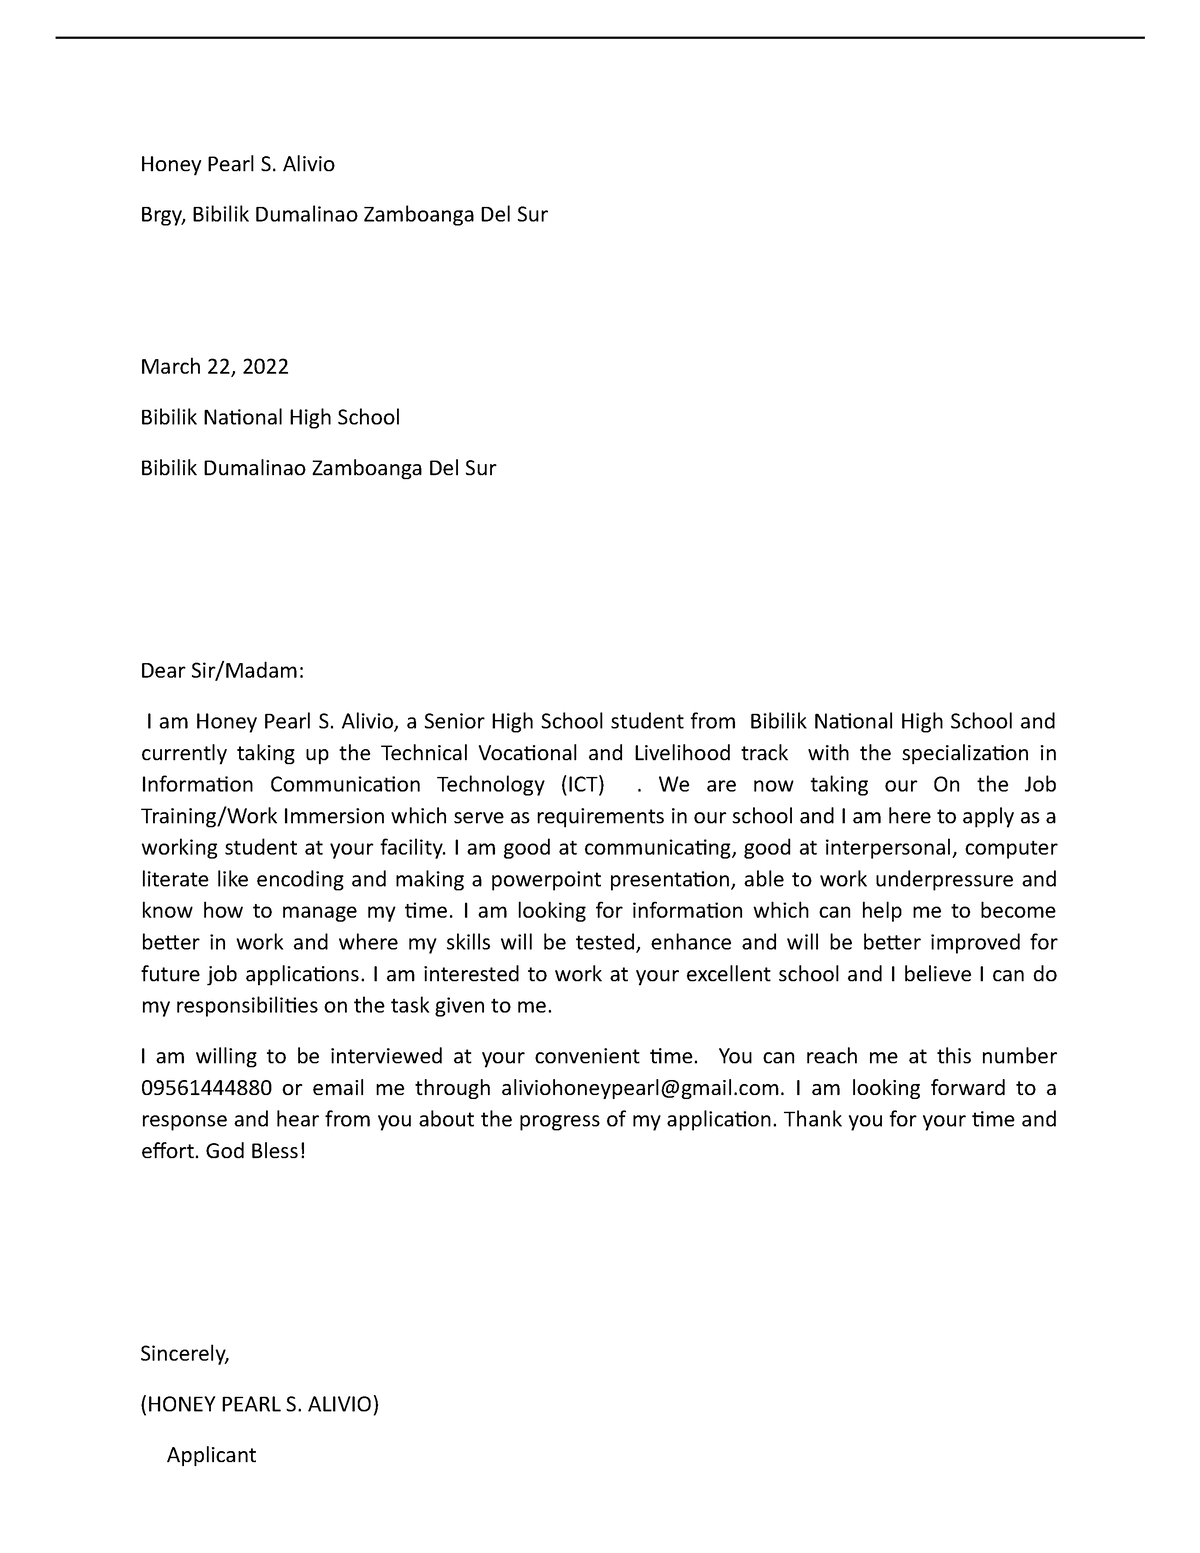 application letter for work immersion css